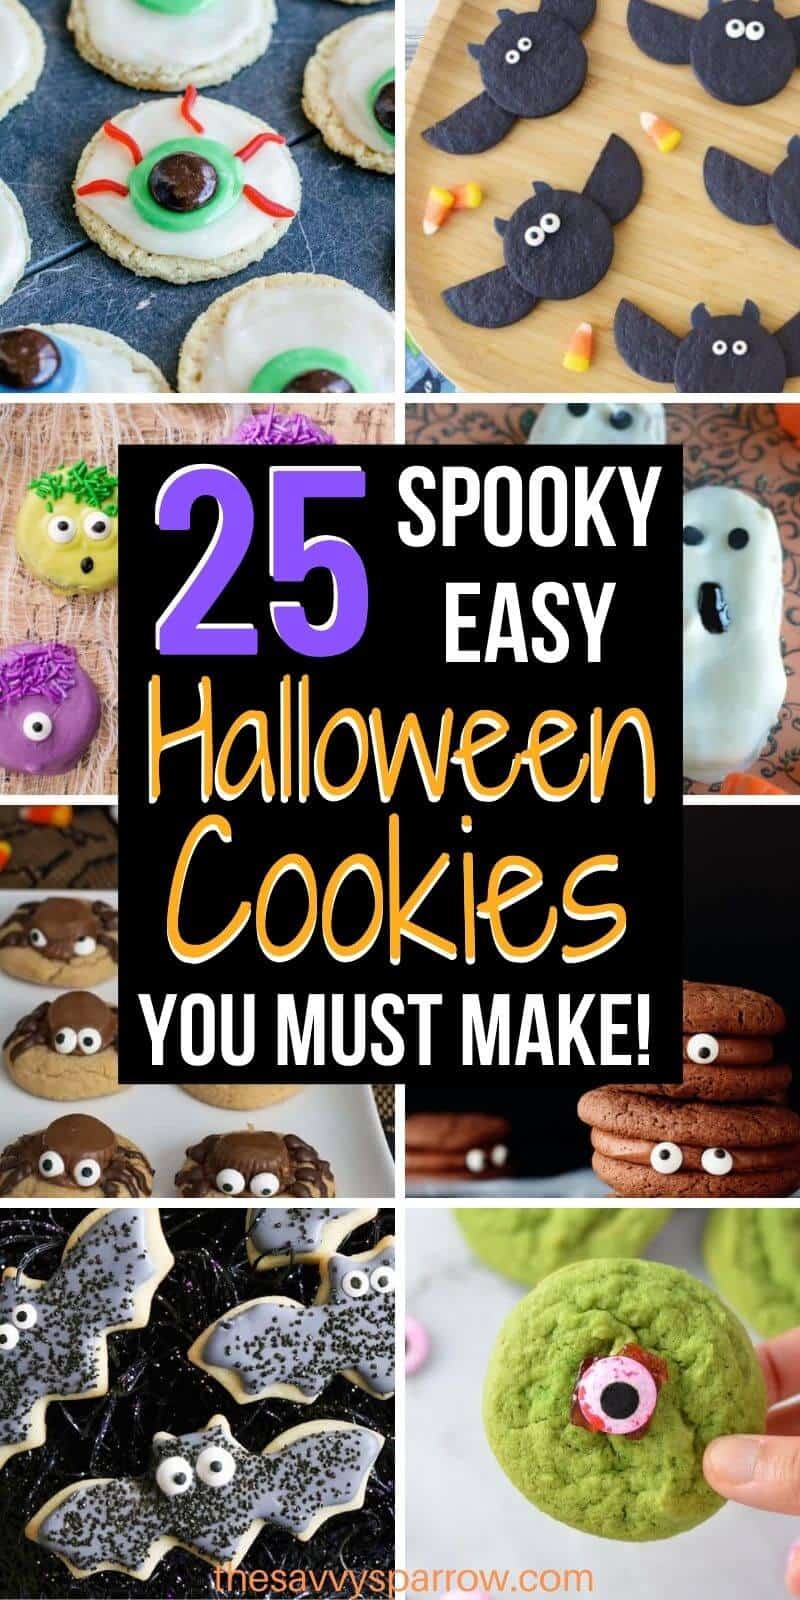 25 Spooky and Easy Halloween Cookies for Kids - The Savvy Sparrow